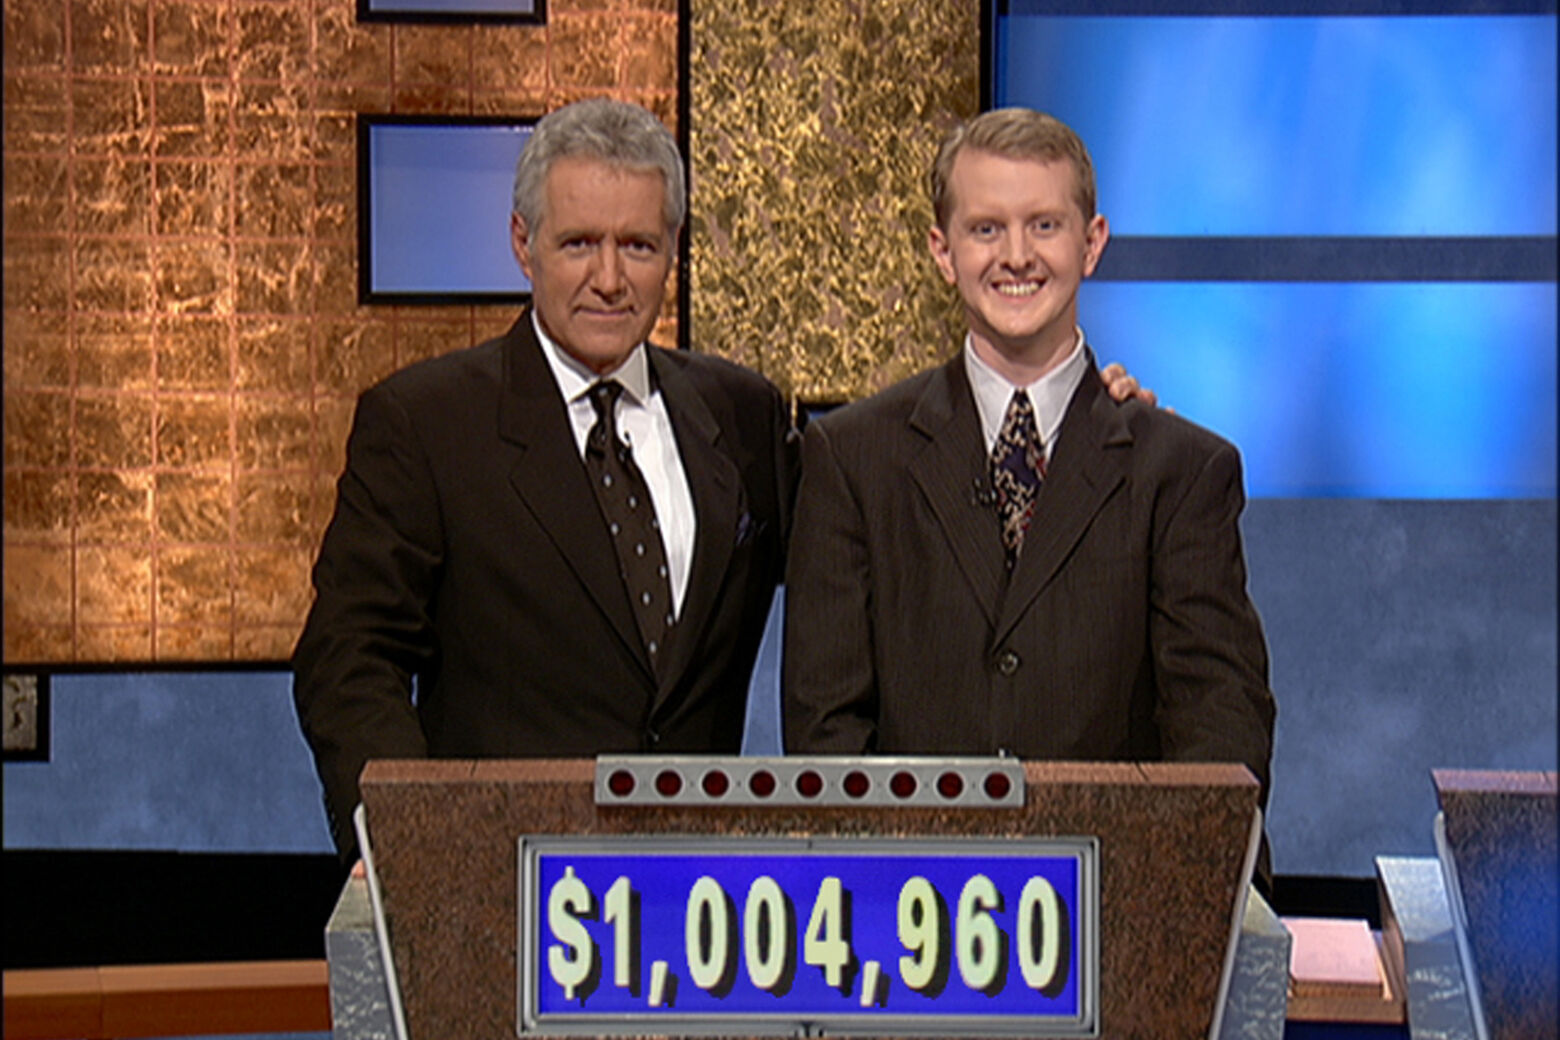 <p>CULVER CITY, CA &#8211; JULY 14: Jeopardy host Alex Trebek, (L) poses contestant Ken Jennings after his earnings from his record breaking streak on the gameshow surpassed 1 million dollars July 14, 2004 in Culver City, California. (Photo by Jeopardy Productions via Getty Images)</p>
